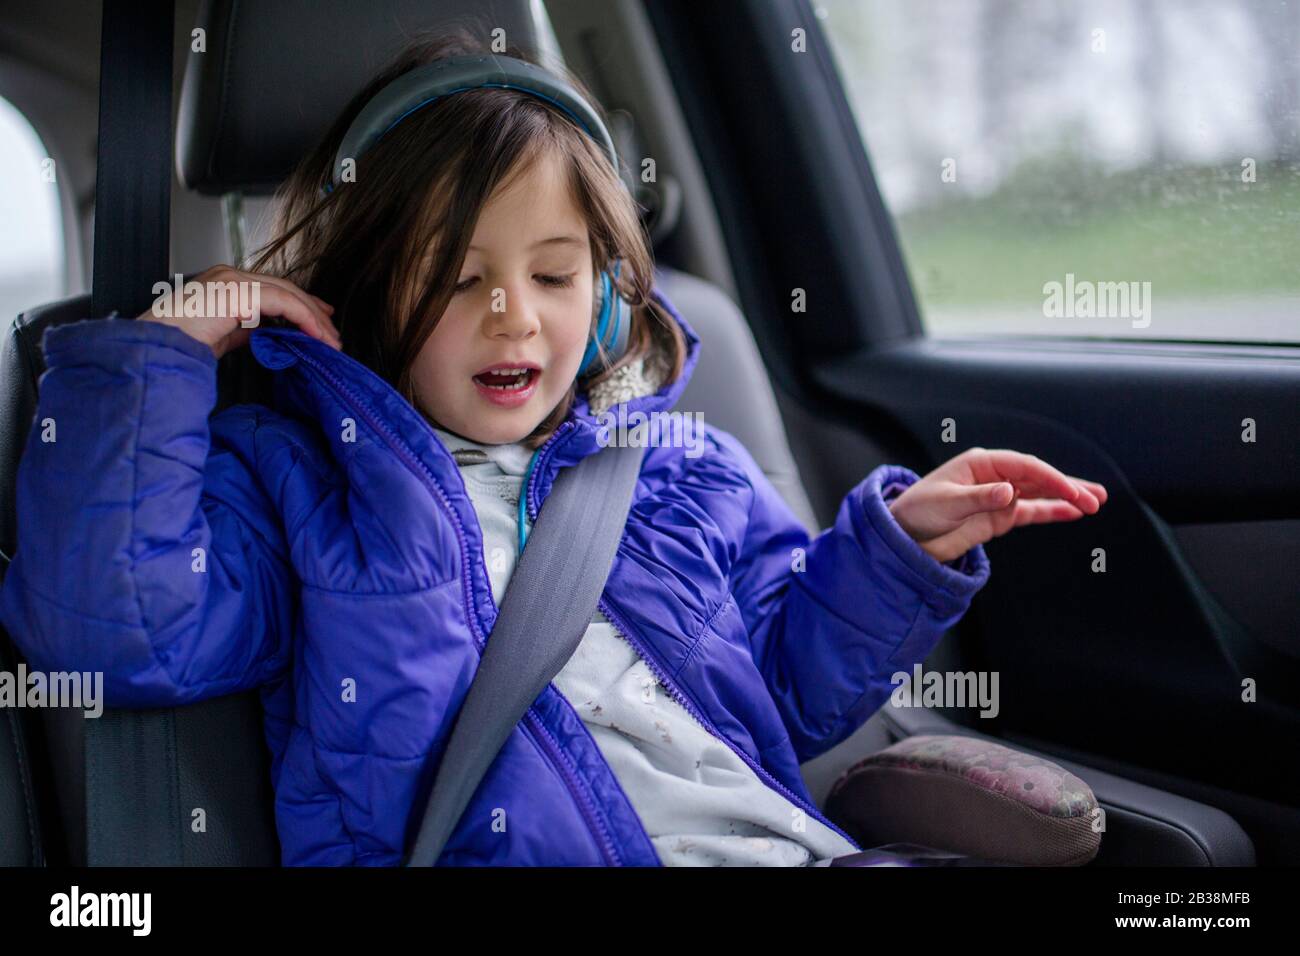 A little girl listens to music on headphones in a car on a car trip Stock Photo